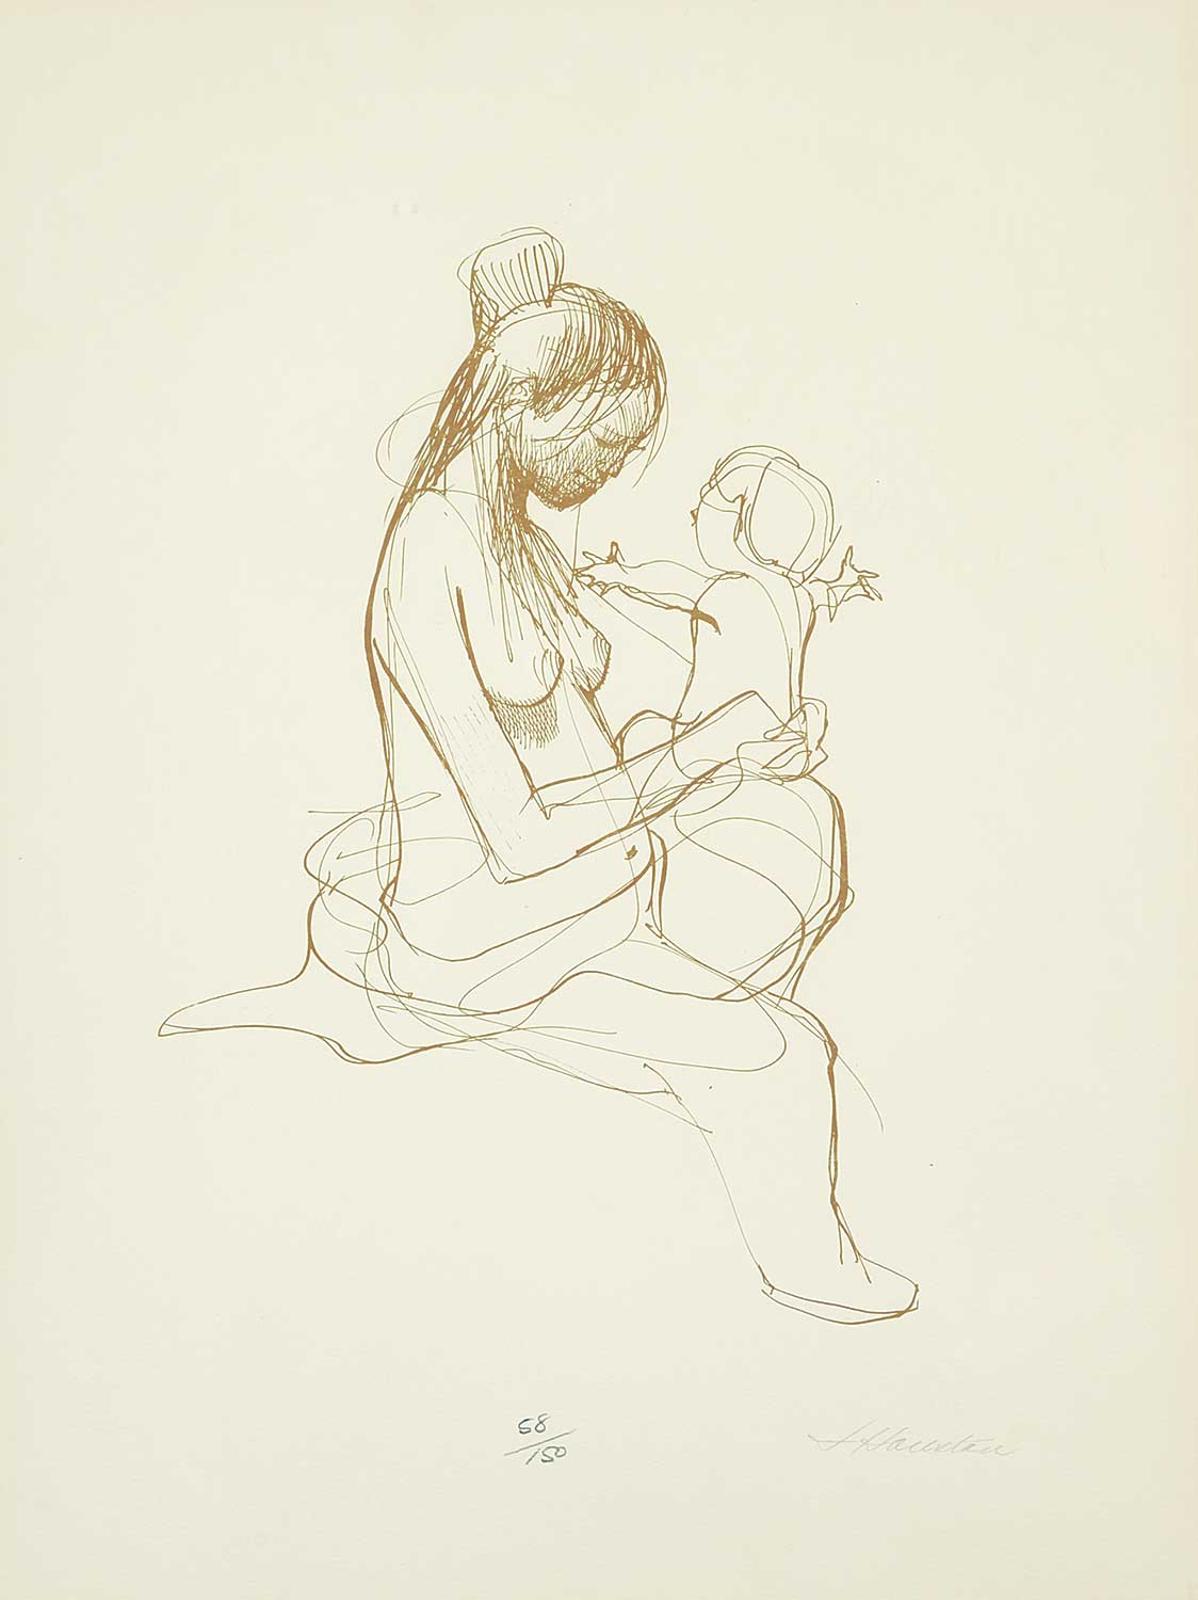 James Archibald Houston (1921-2005) - Untitled - Mother and Child  #68/150